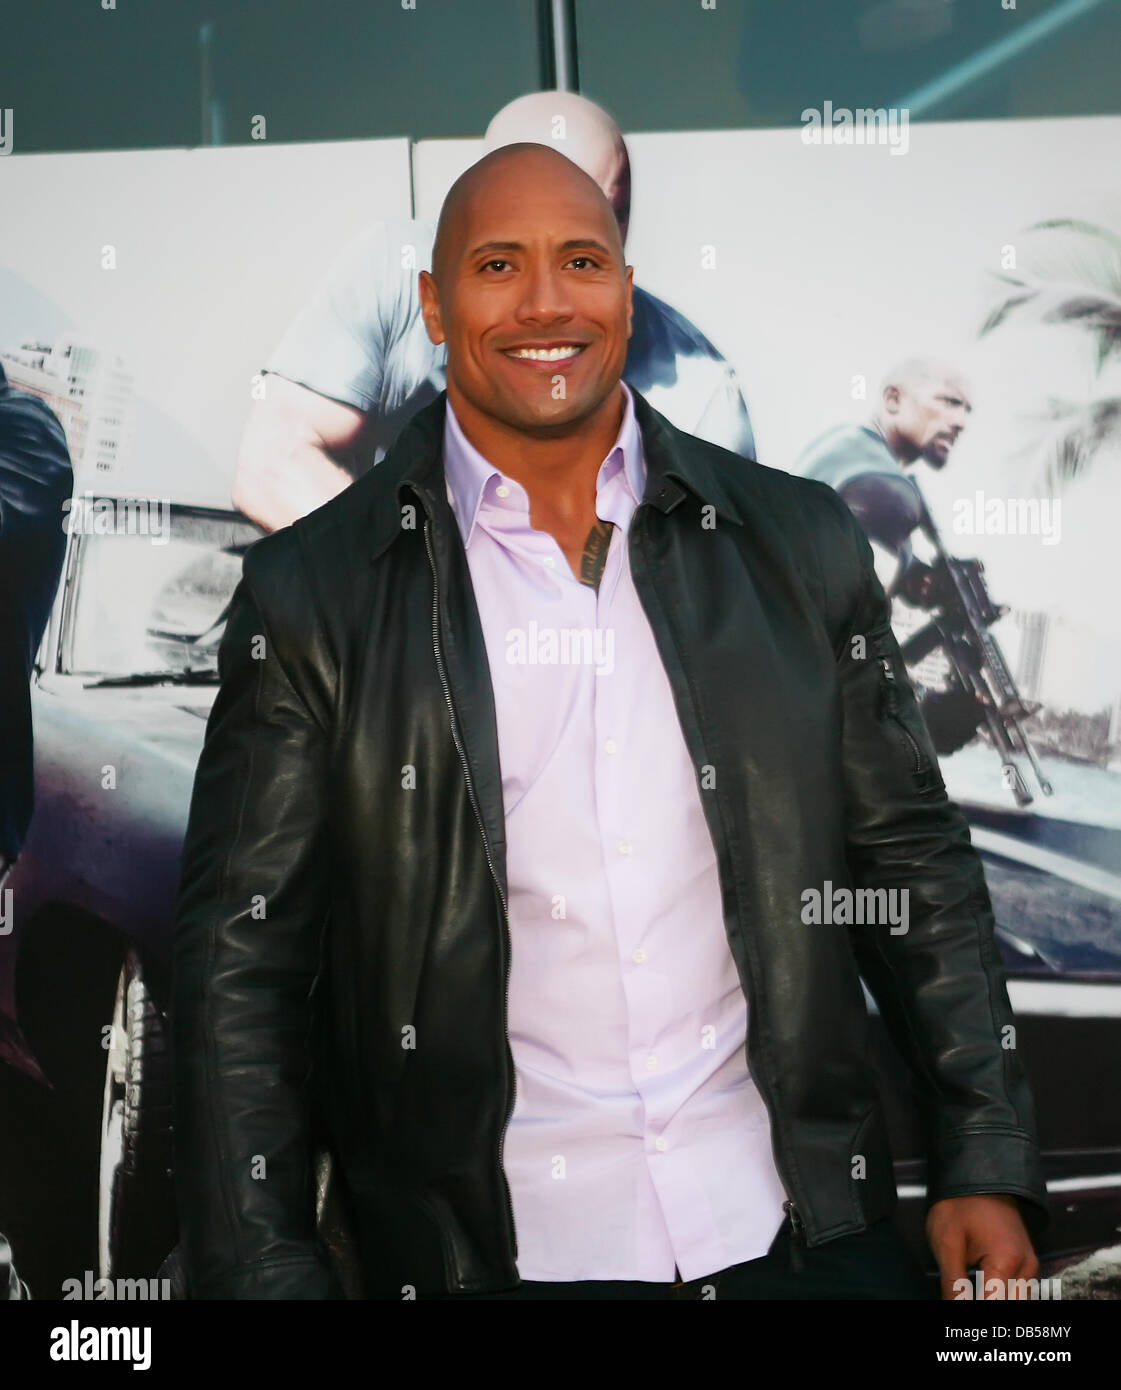 Dwayne Johnson, aka The Rock attends the Premiere for 'Fast & Furious 5: Rio Heist' at the Pathe Arena Amsterdam, Netherlands - 26.04.11 Stock Photo